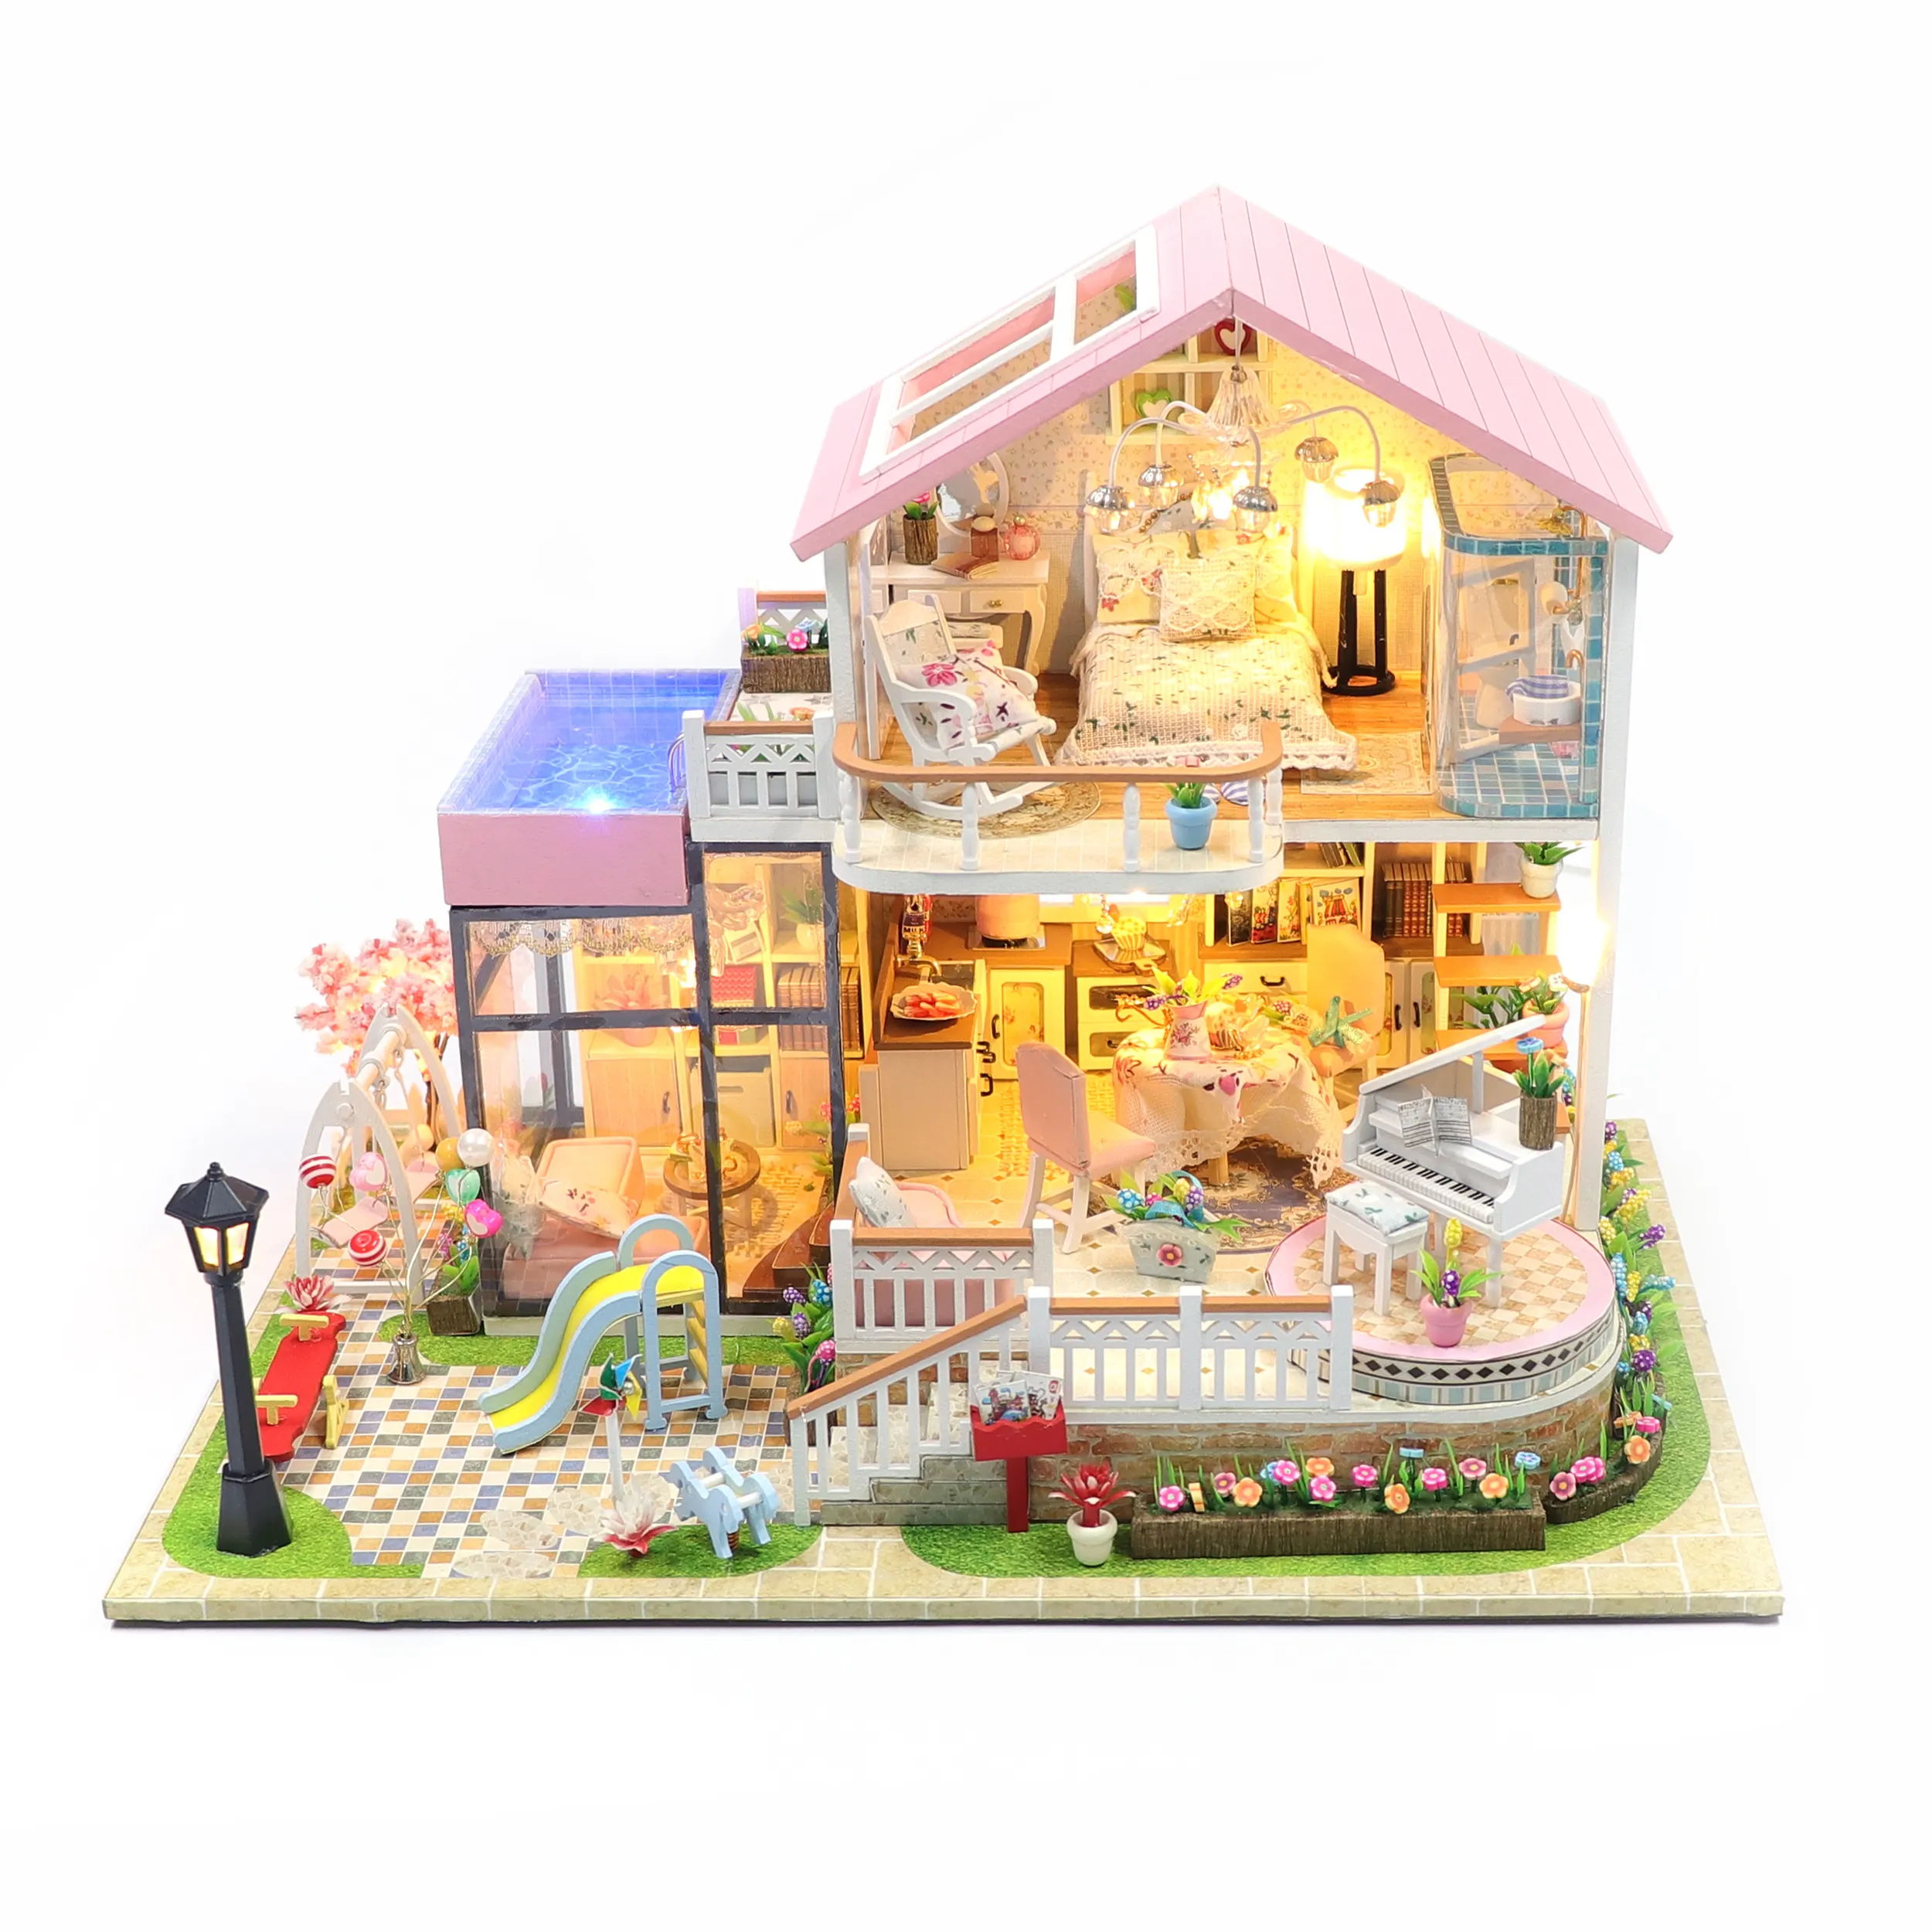 DIY Cute Pink Princess Room Crafted Wooden Miniature Doll Houses For Children Gift With Led Light